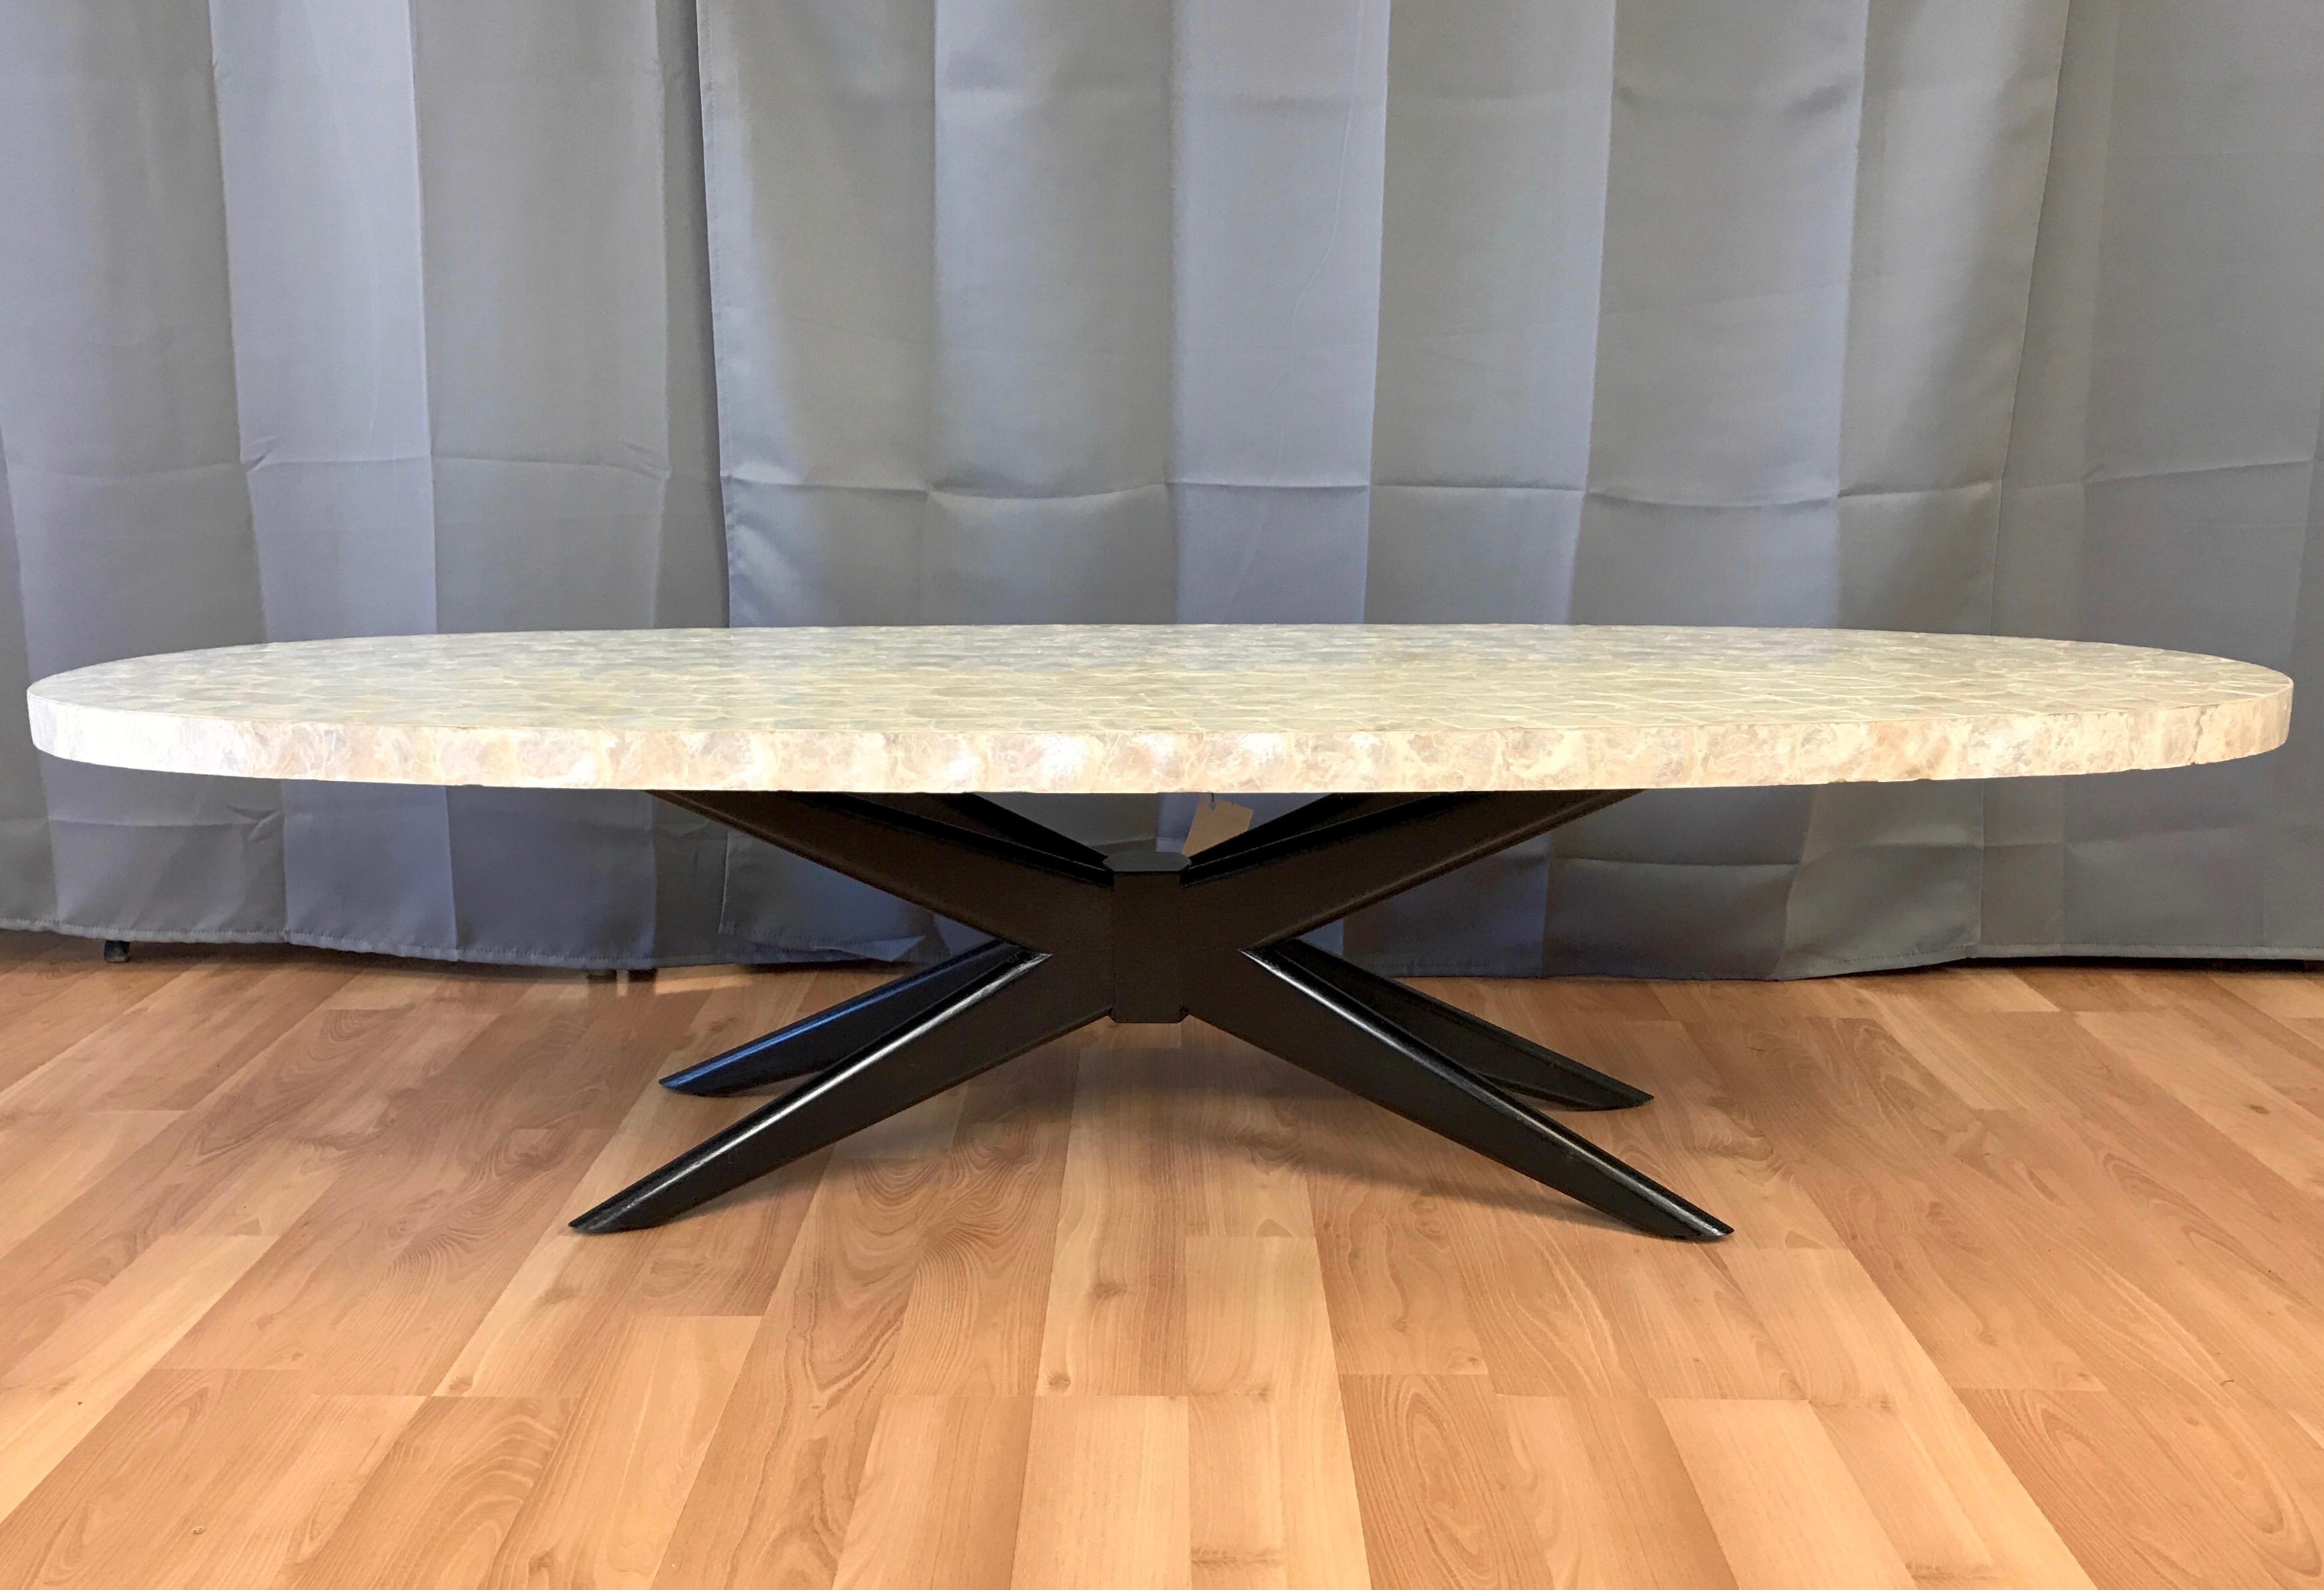 Capiz Shell Surfboard Coffee Table Past Perfect in sizing 3514 X 2404